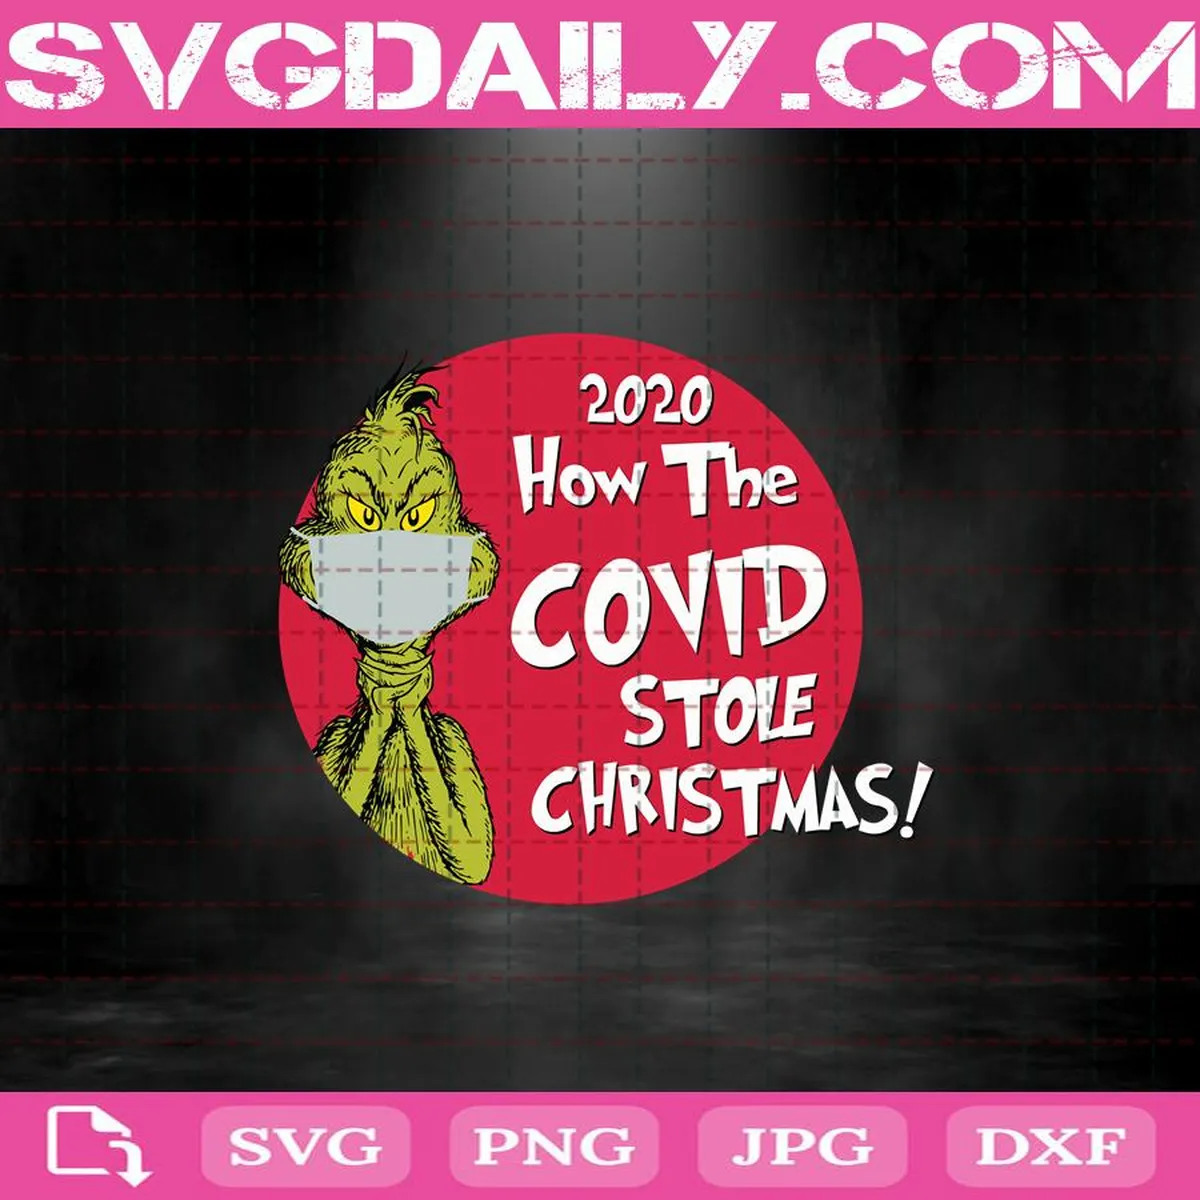 Cute Grinch Svg, 2020 How The Covid Stole Christmas Svg, Grinch Wears Face Mask Svg, Grinch Svg, Svg Png Dxf Eps Download Files